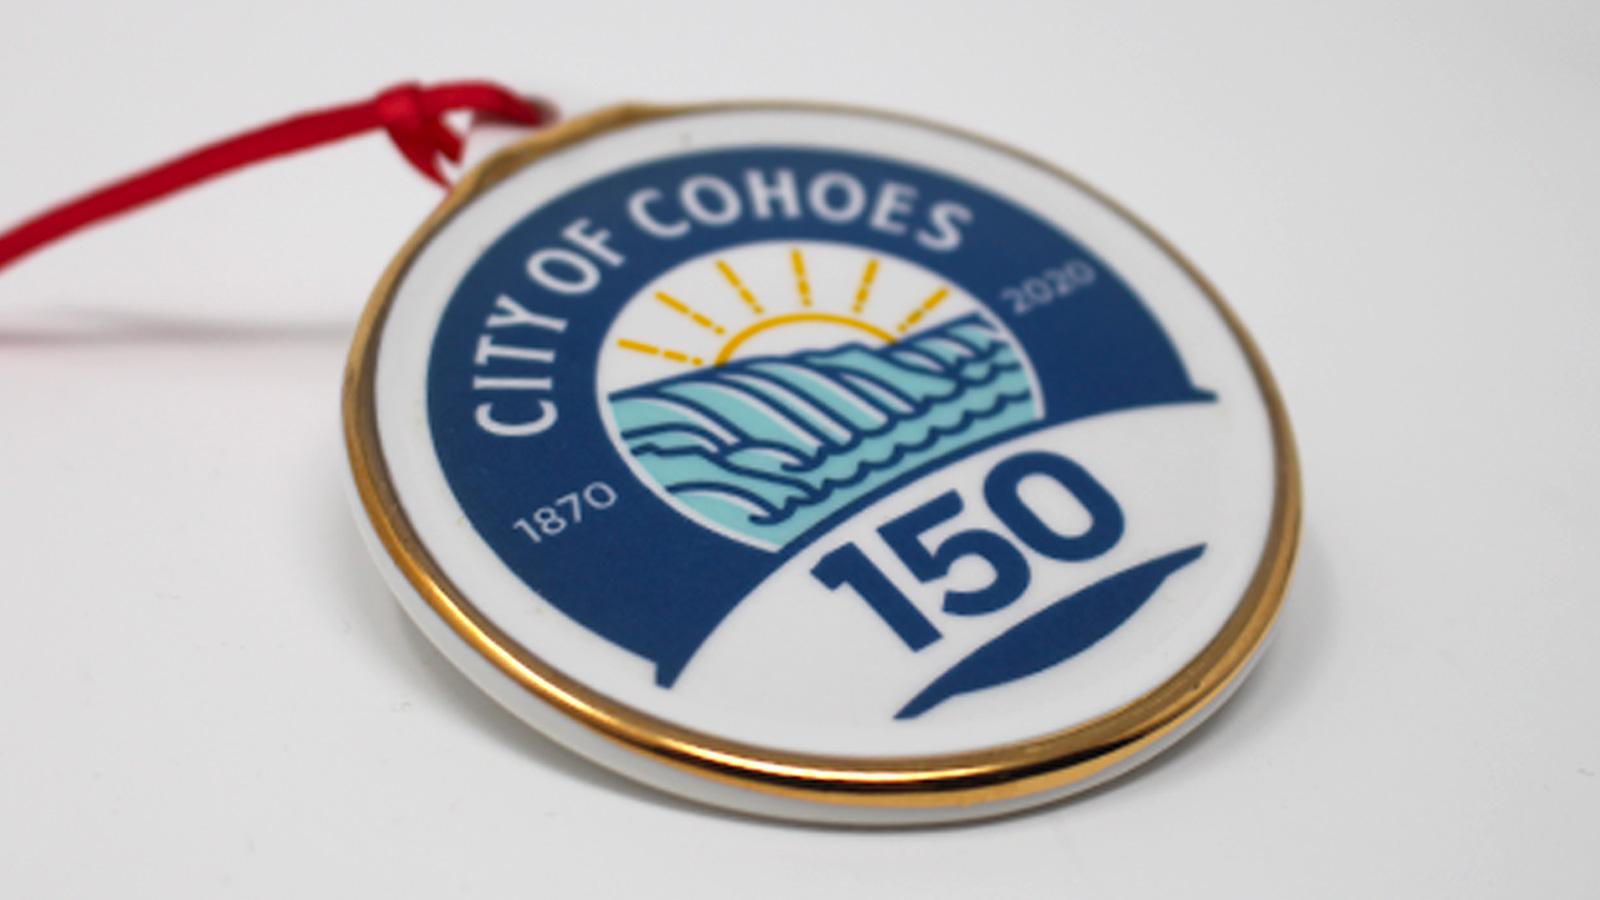 City of Cohoes | Ceramic Ornament